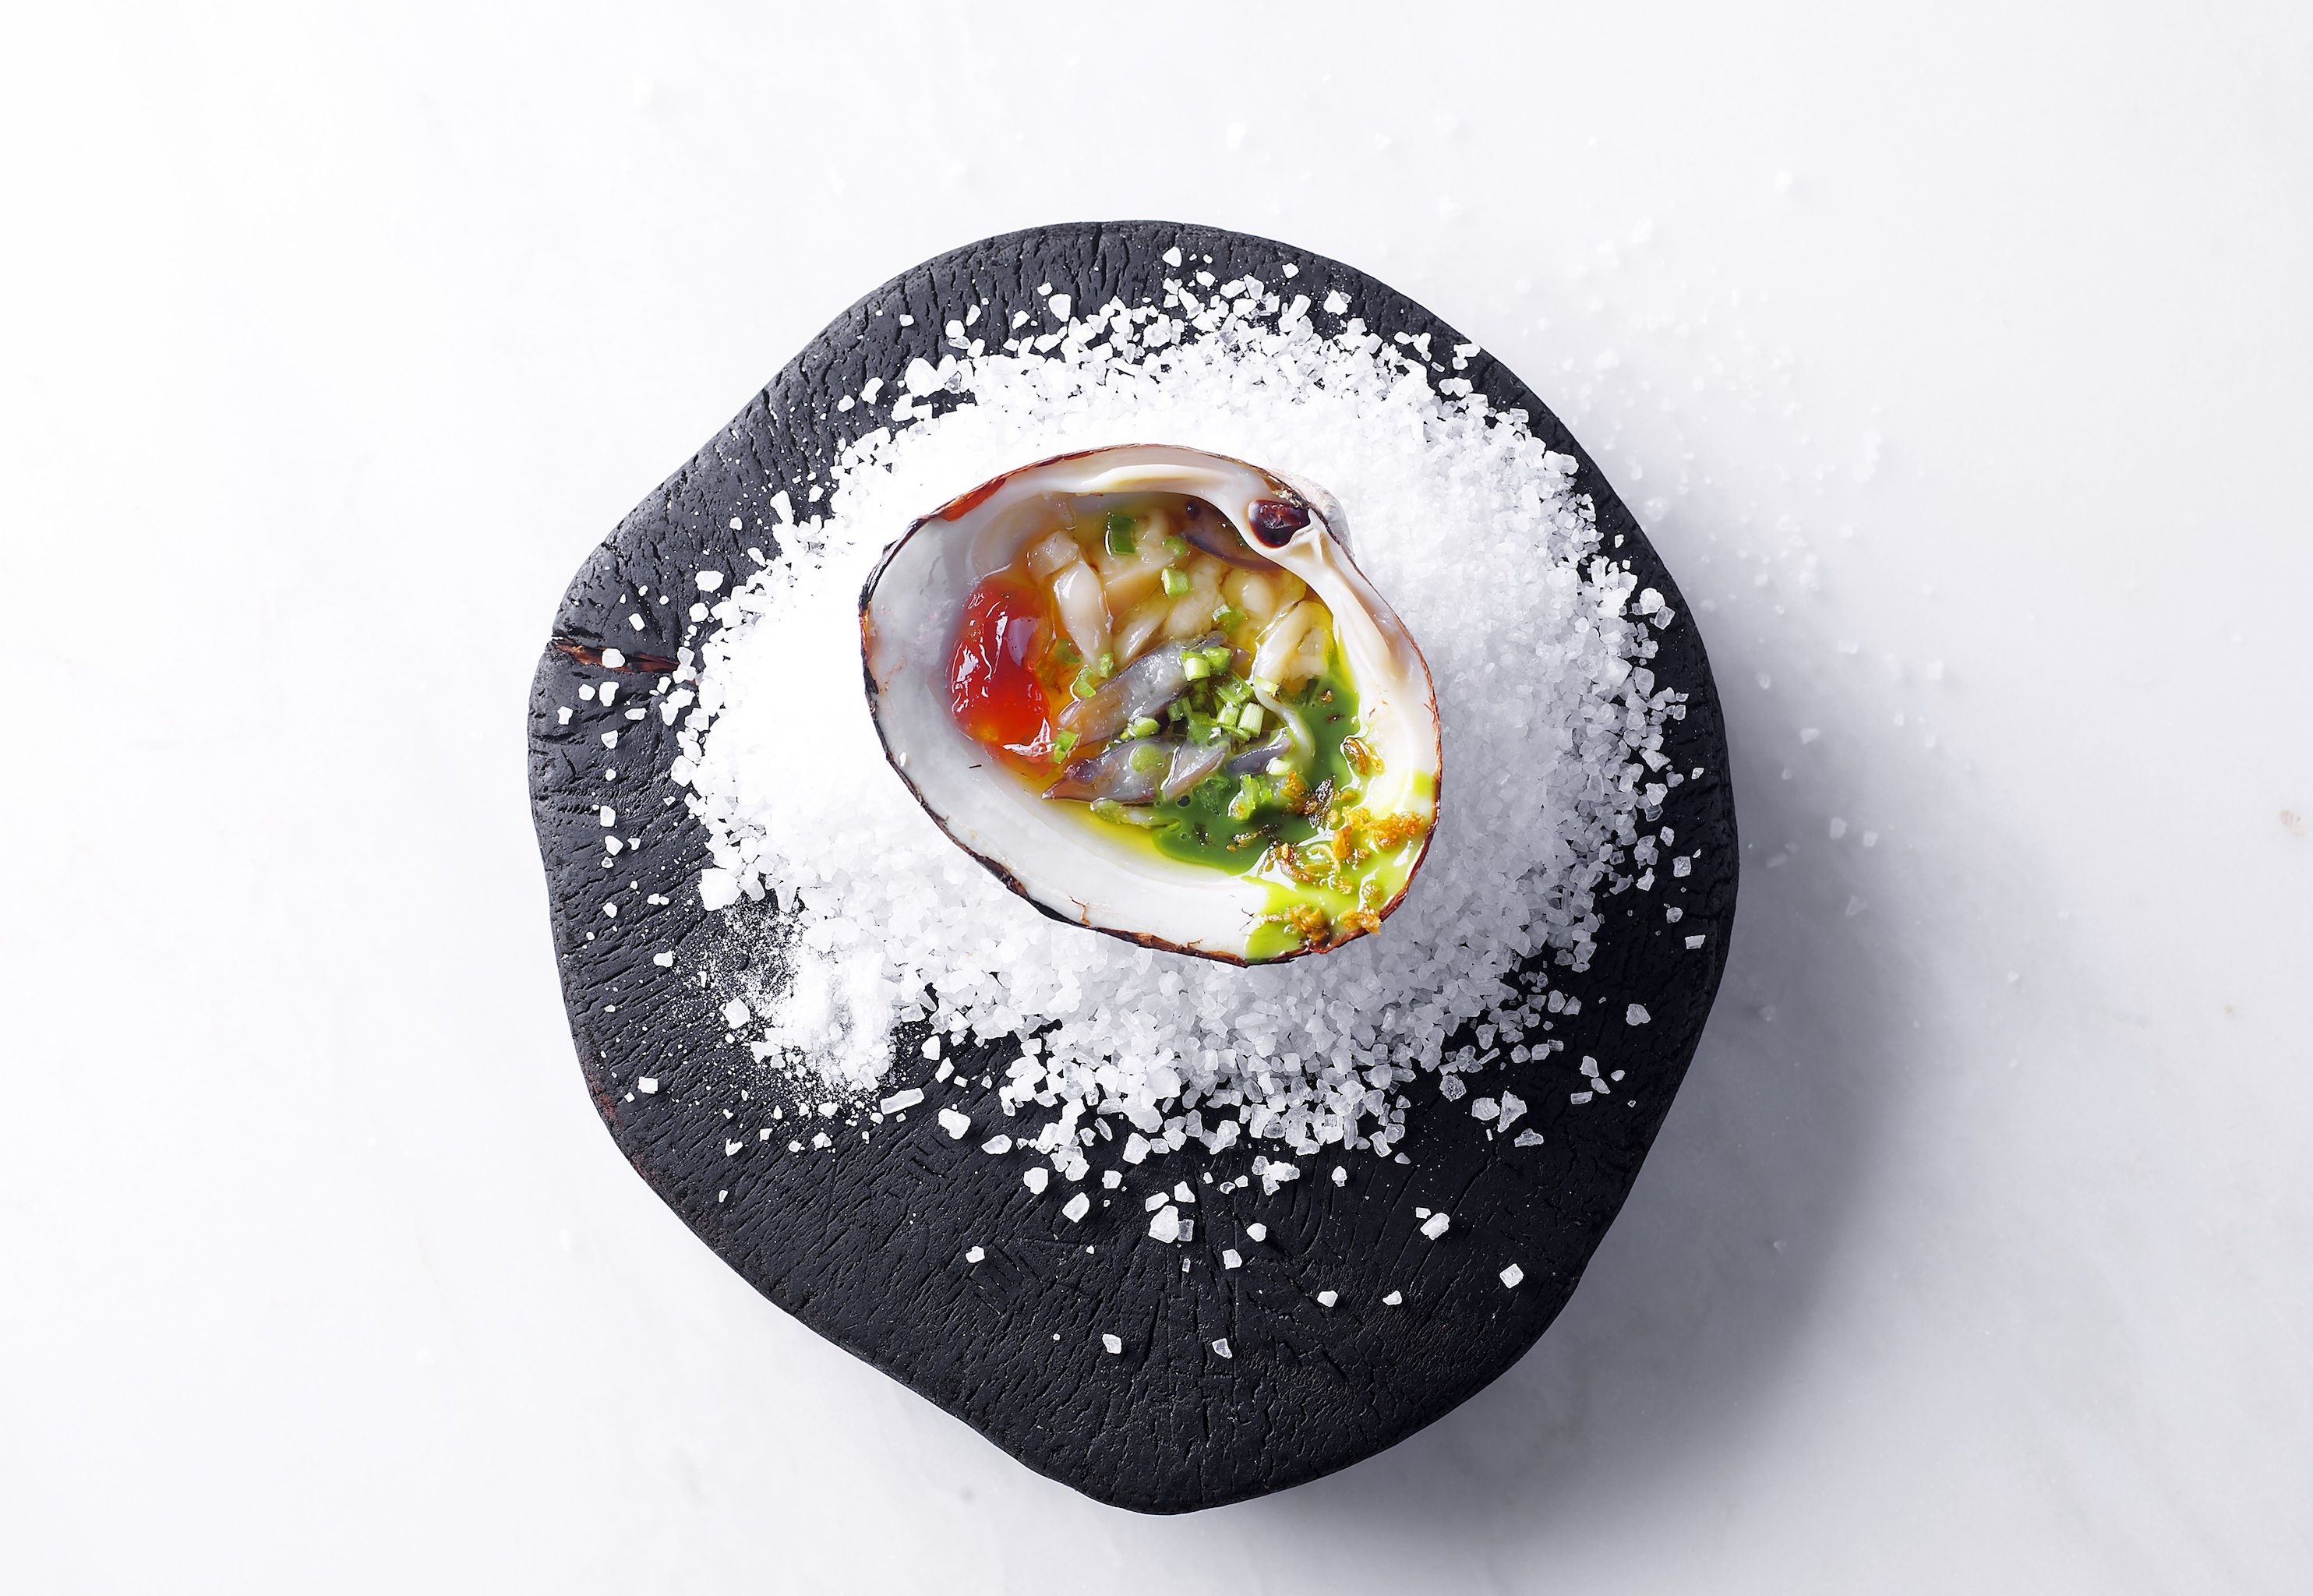 Enjoy Michelin-starred meals at the 18th World Gourmet Festival this September